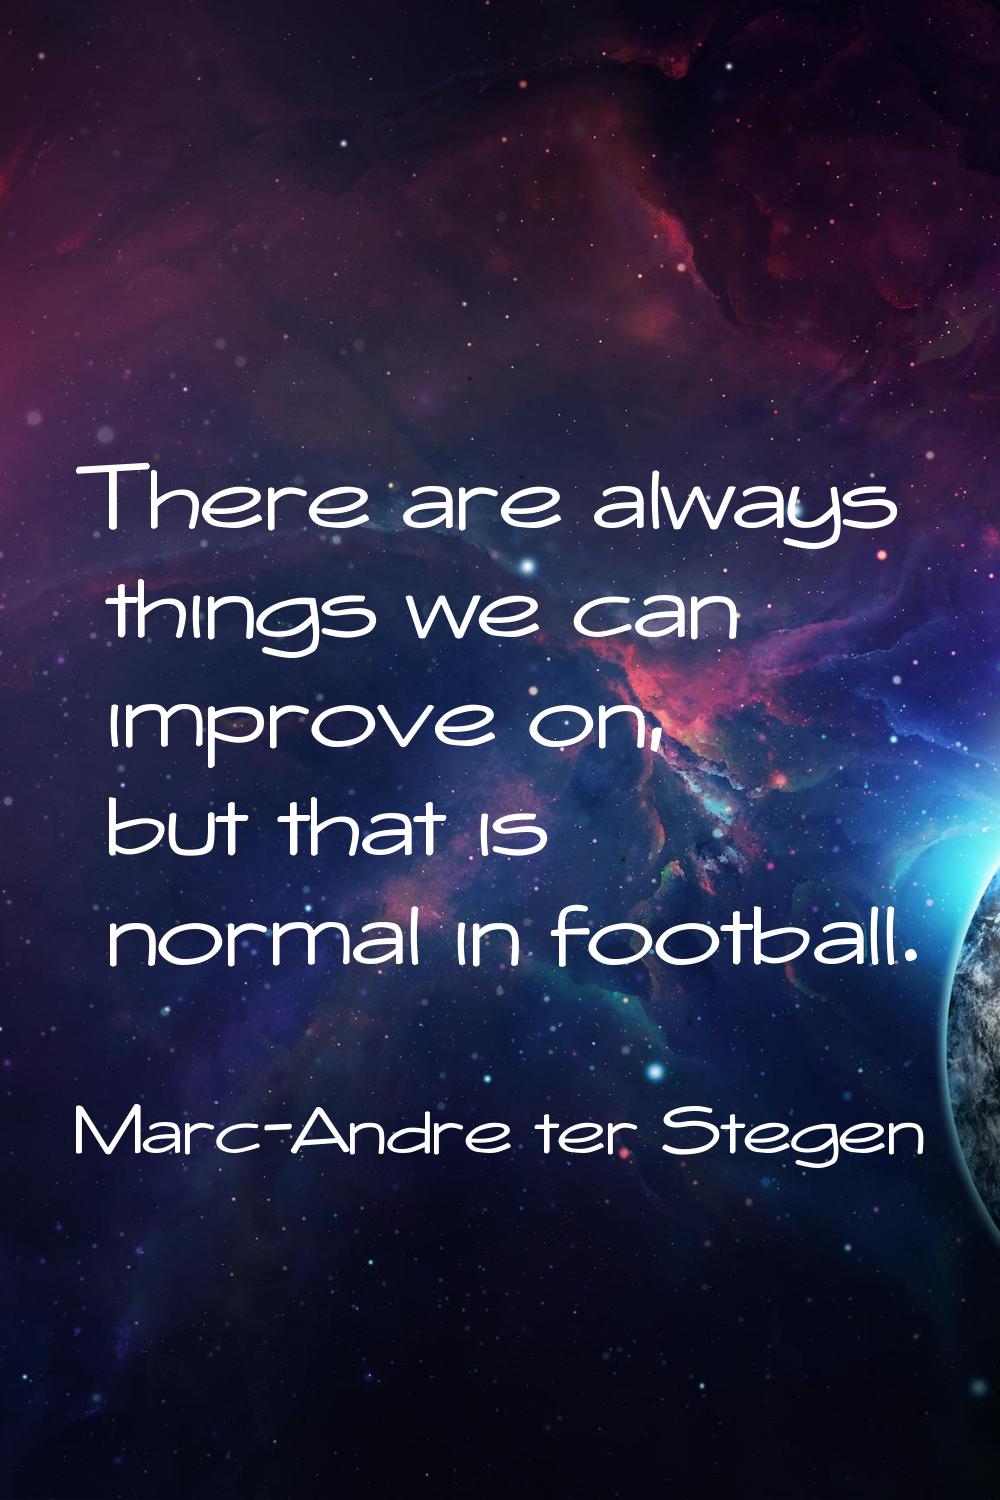 There are always things we can improve on, but that is normal in football.